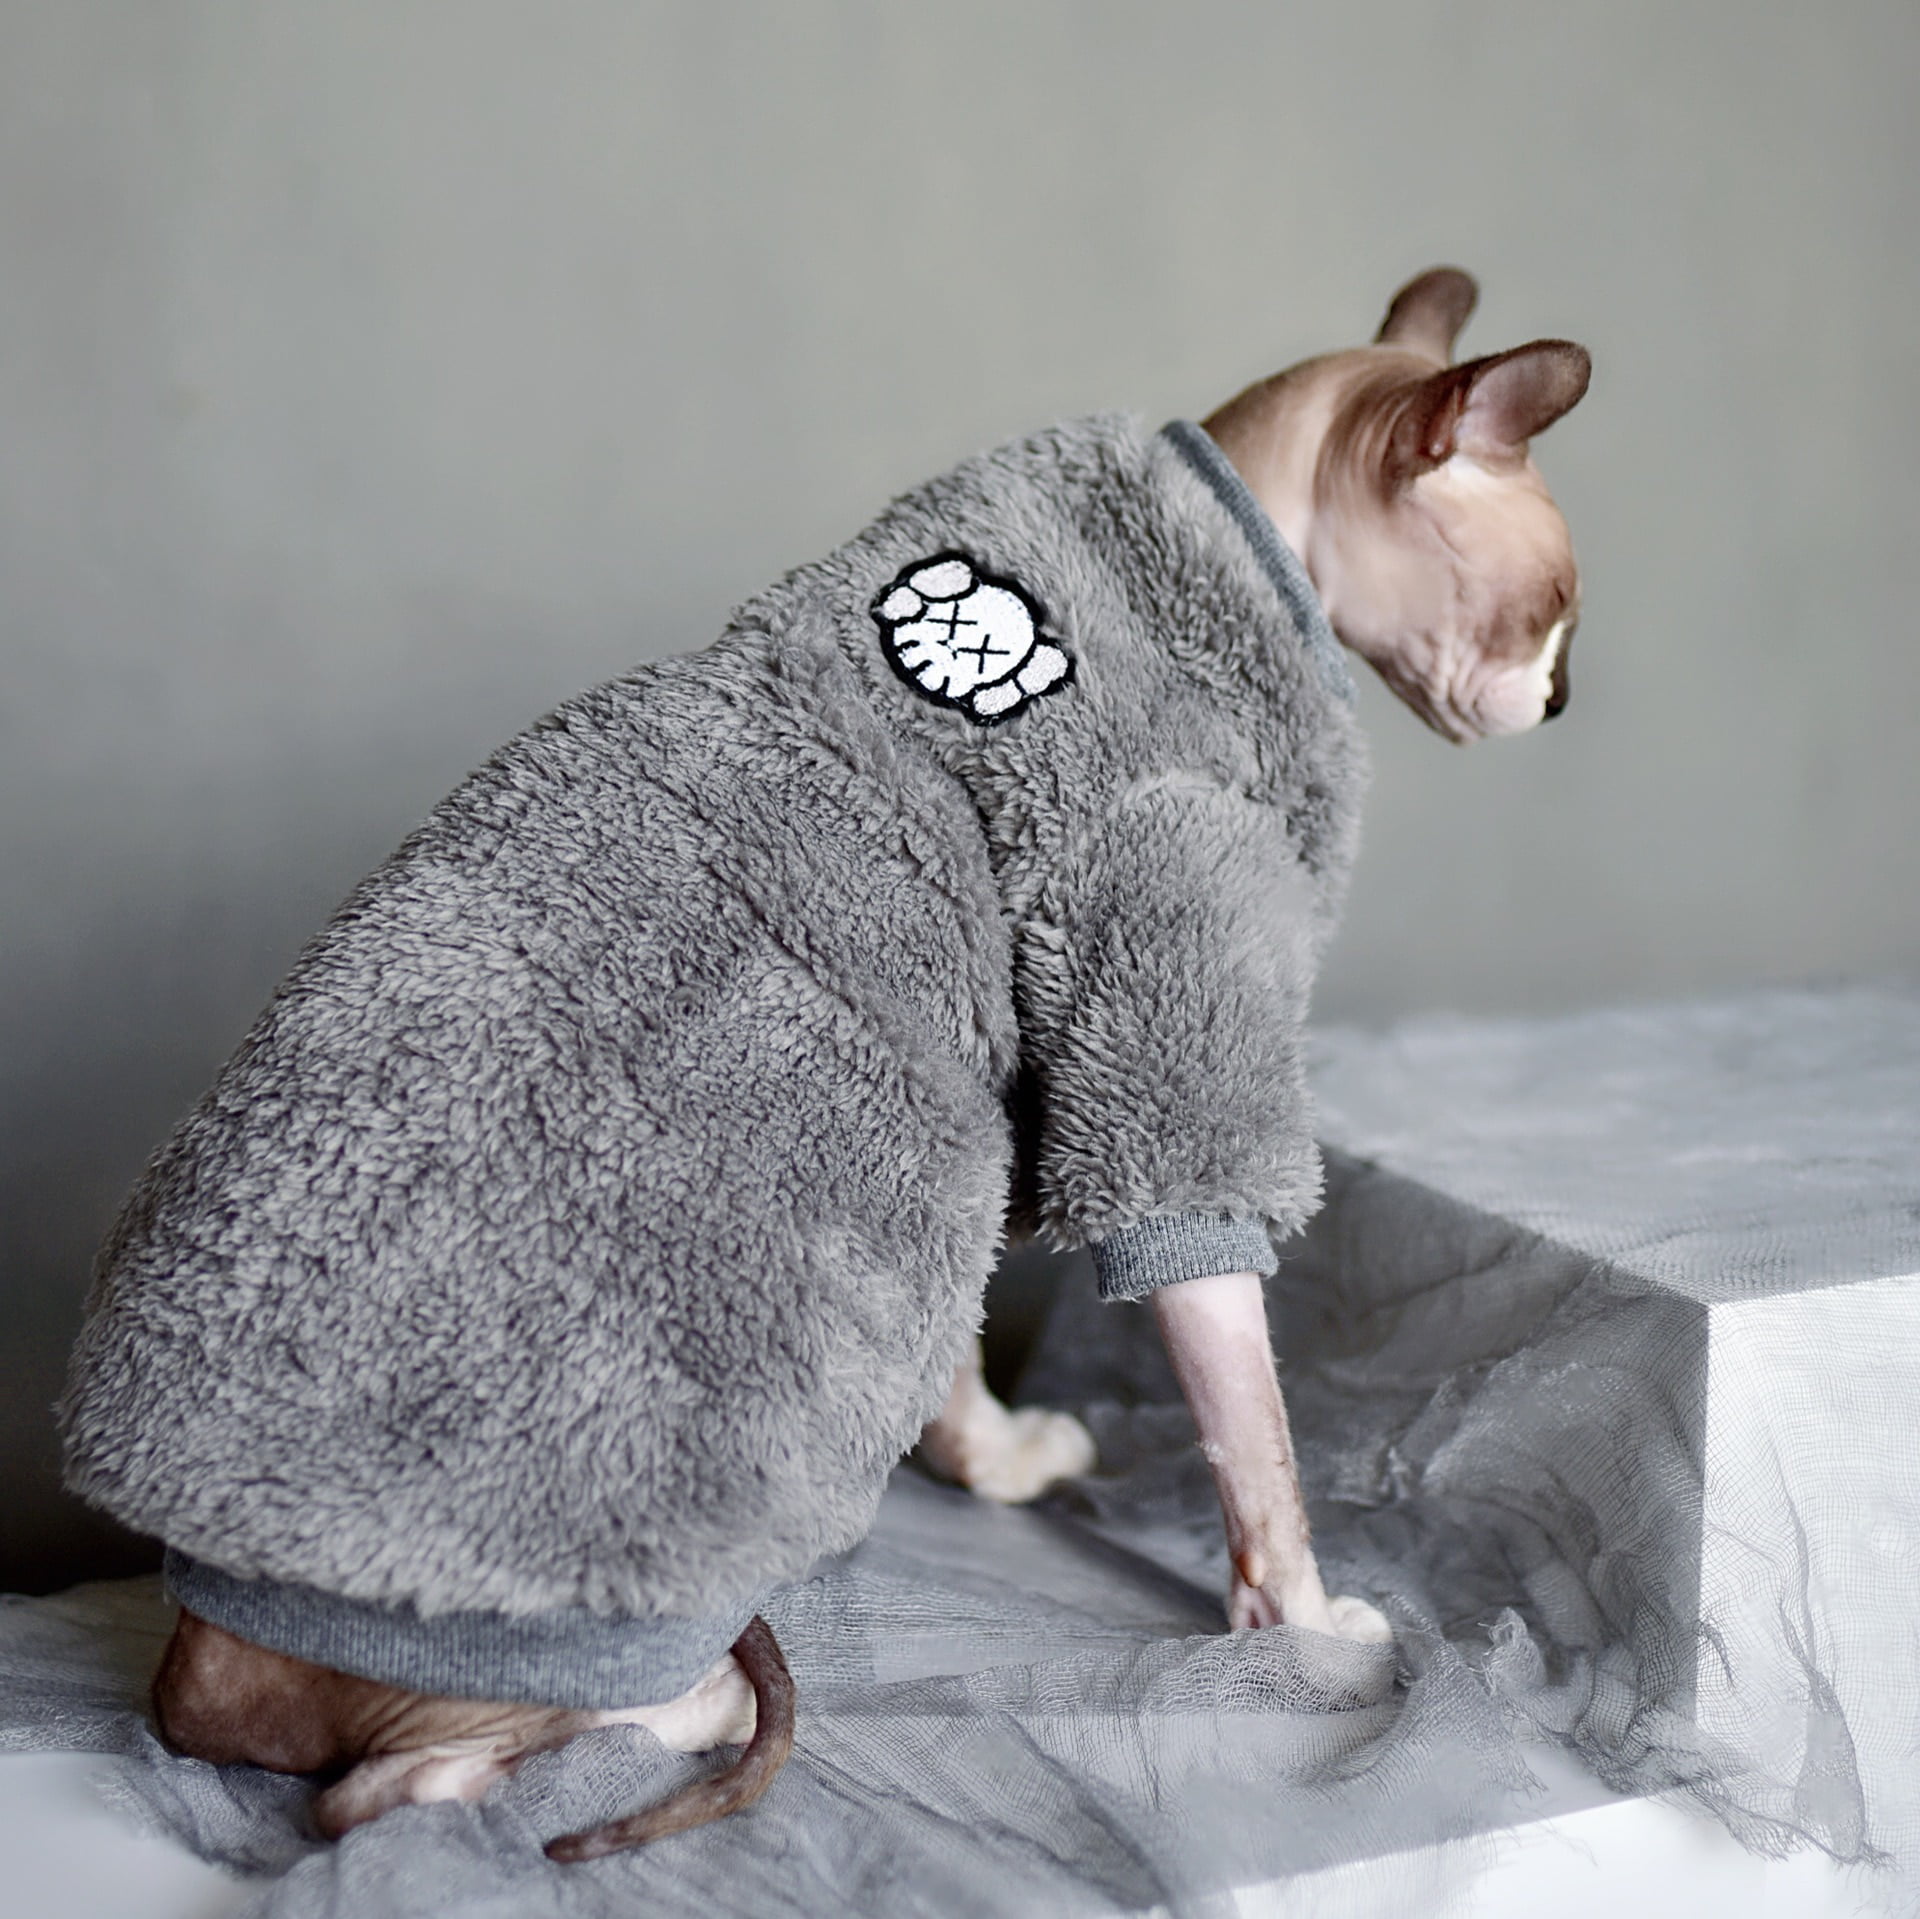 Sphynx cat clothes Sweater for cat.Jumpsuit for cat .Hairless cat.Soft and warm cloth for any breed of cat Handmade